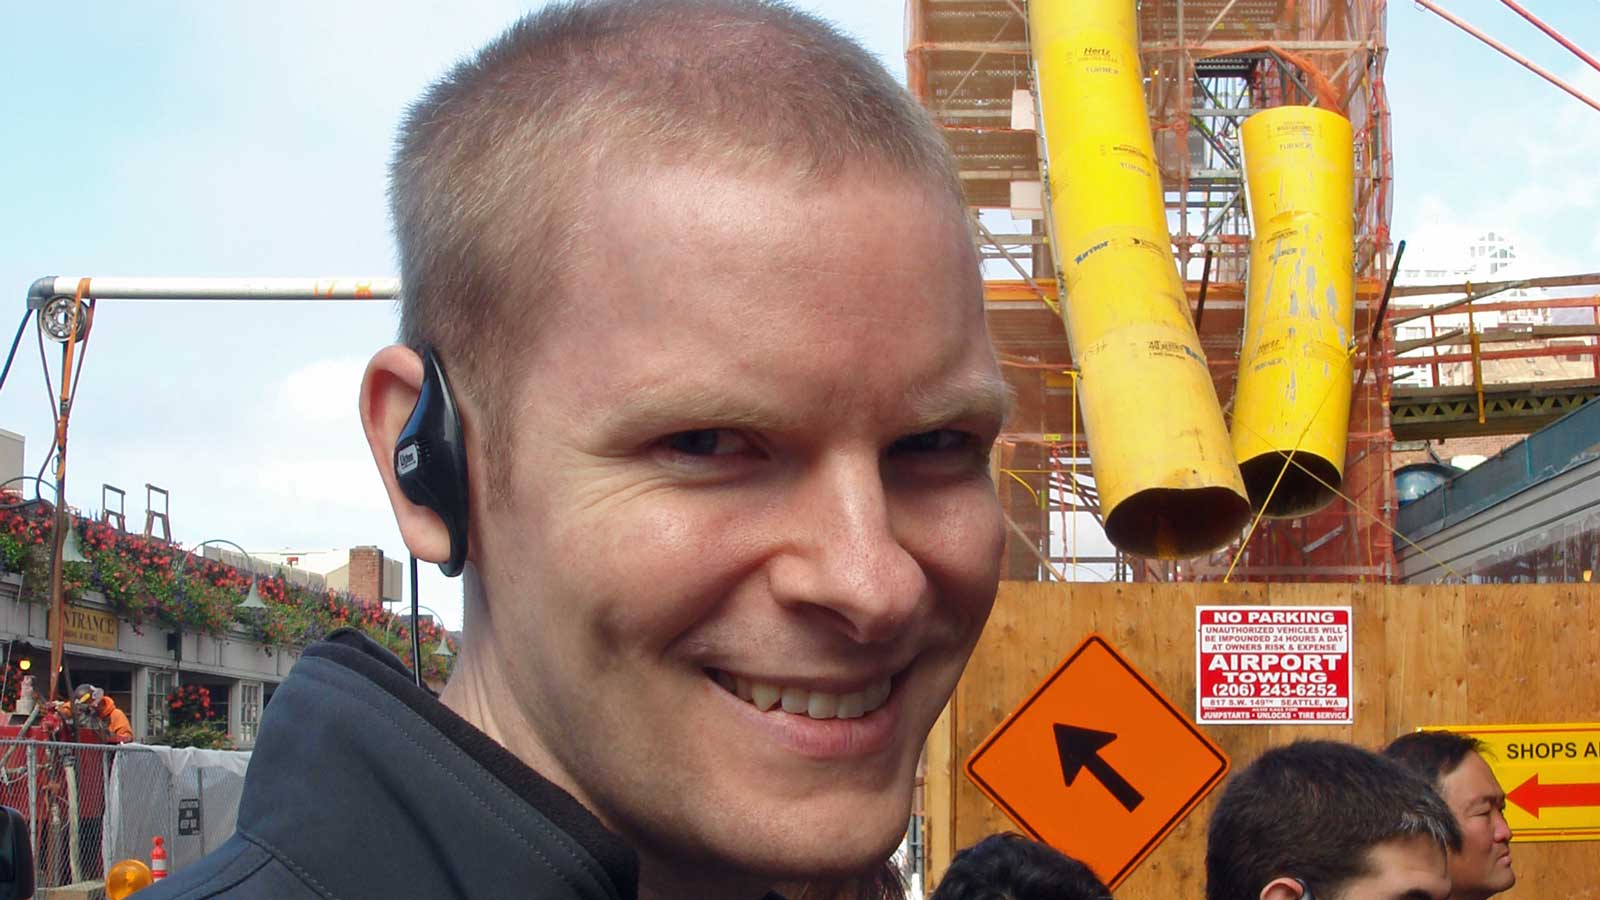 William with a wireless earpiece in his ear